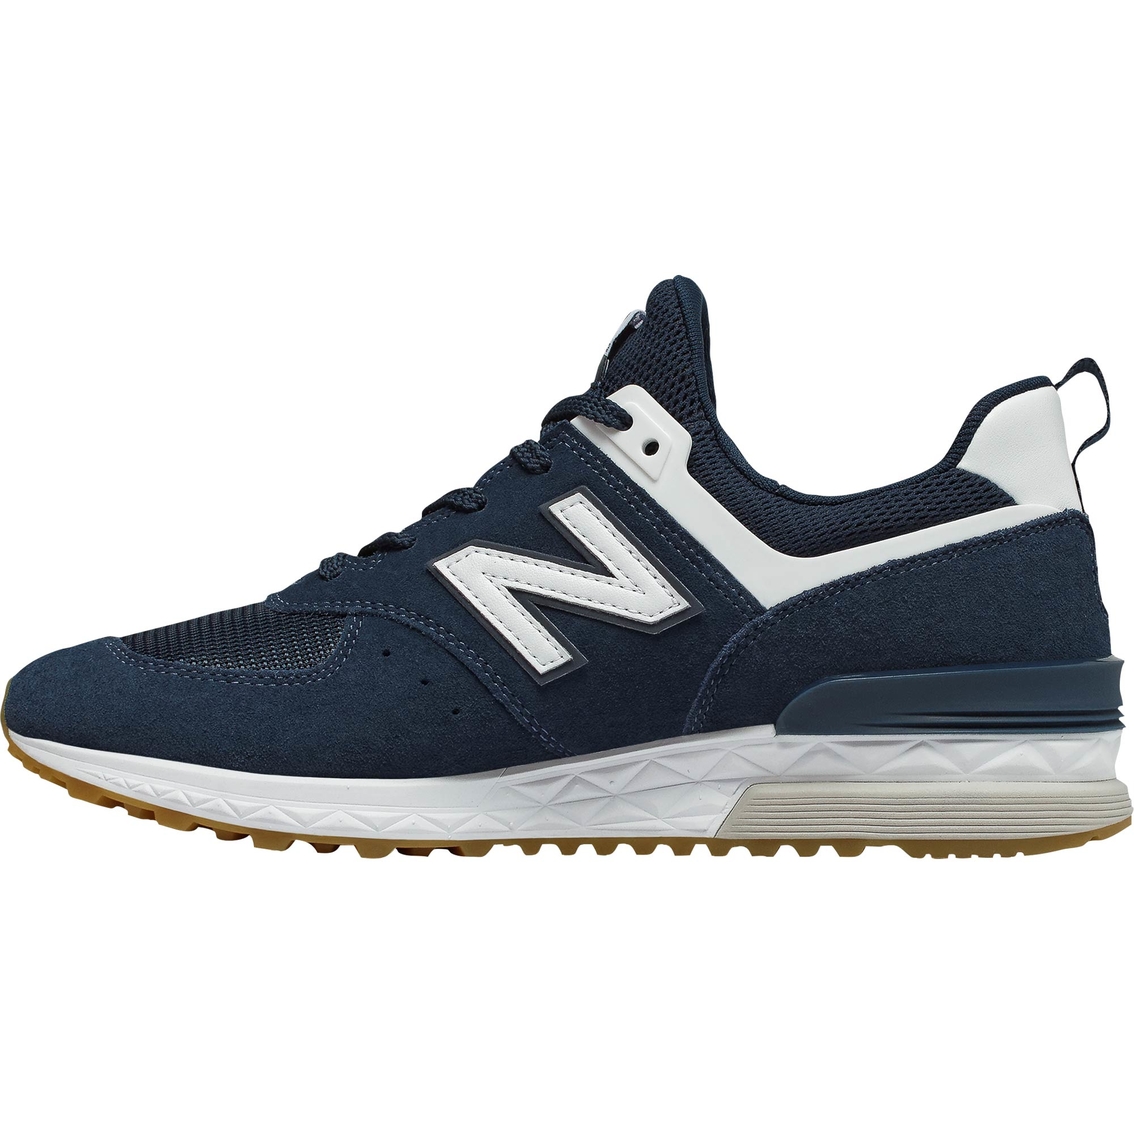 New Balance Men's Ms574fcn Lifestyle Athletic Shoes | Sneakers ...